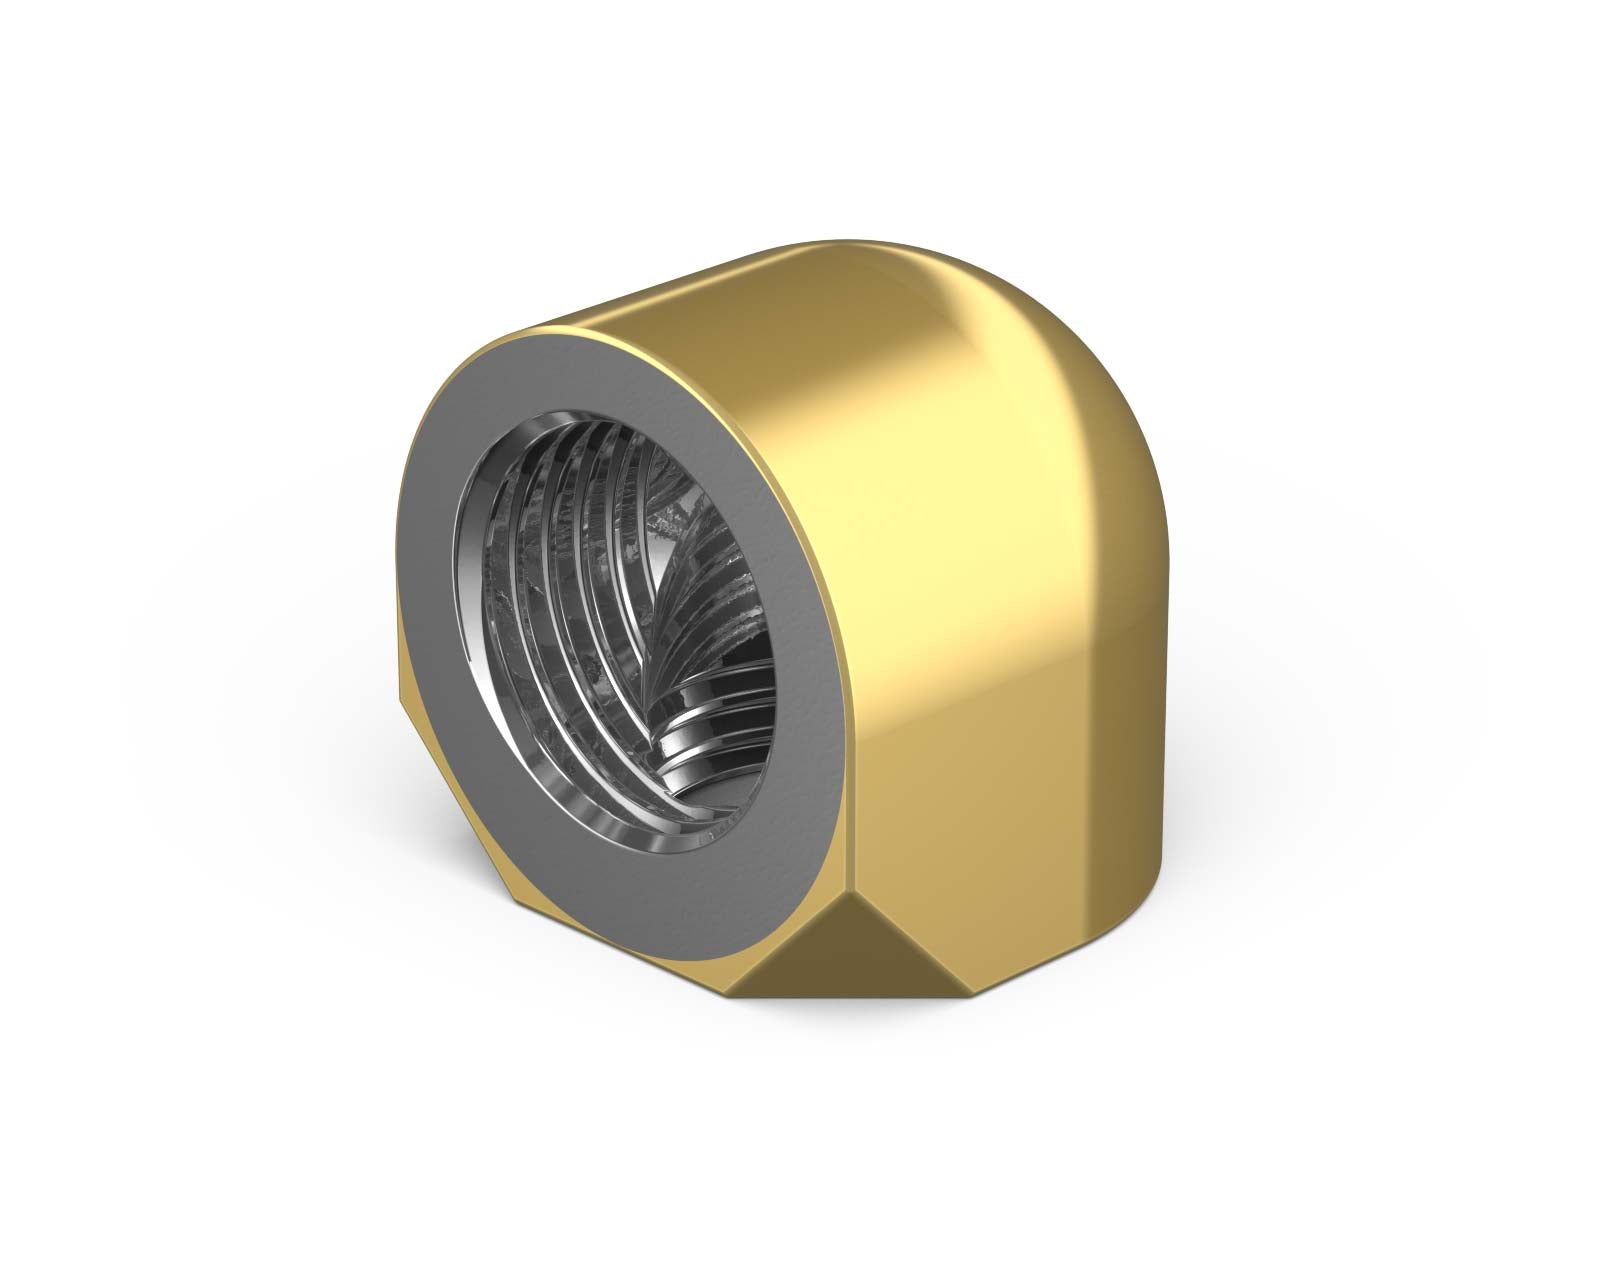 PrimoChill Female to Female G 1/4in. 90 Degree SX Elbow Fitting - PrimoChill - KEEPING IT COOL Candy Gold